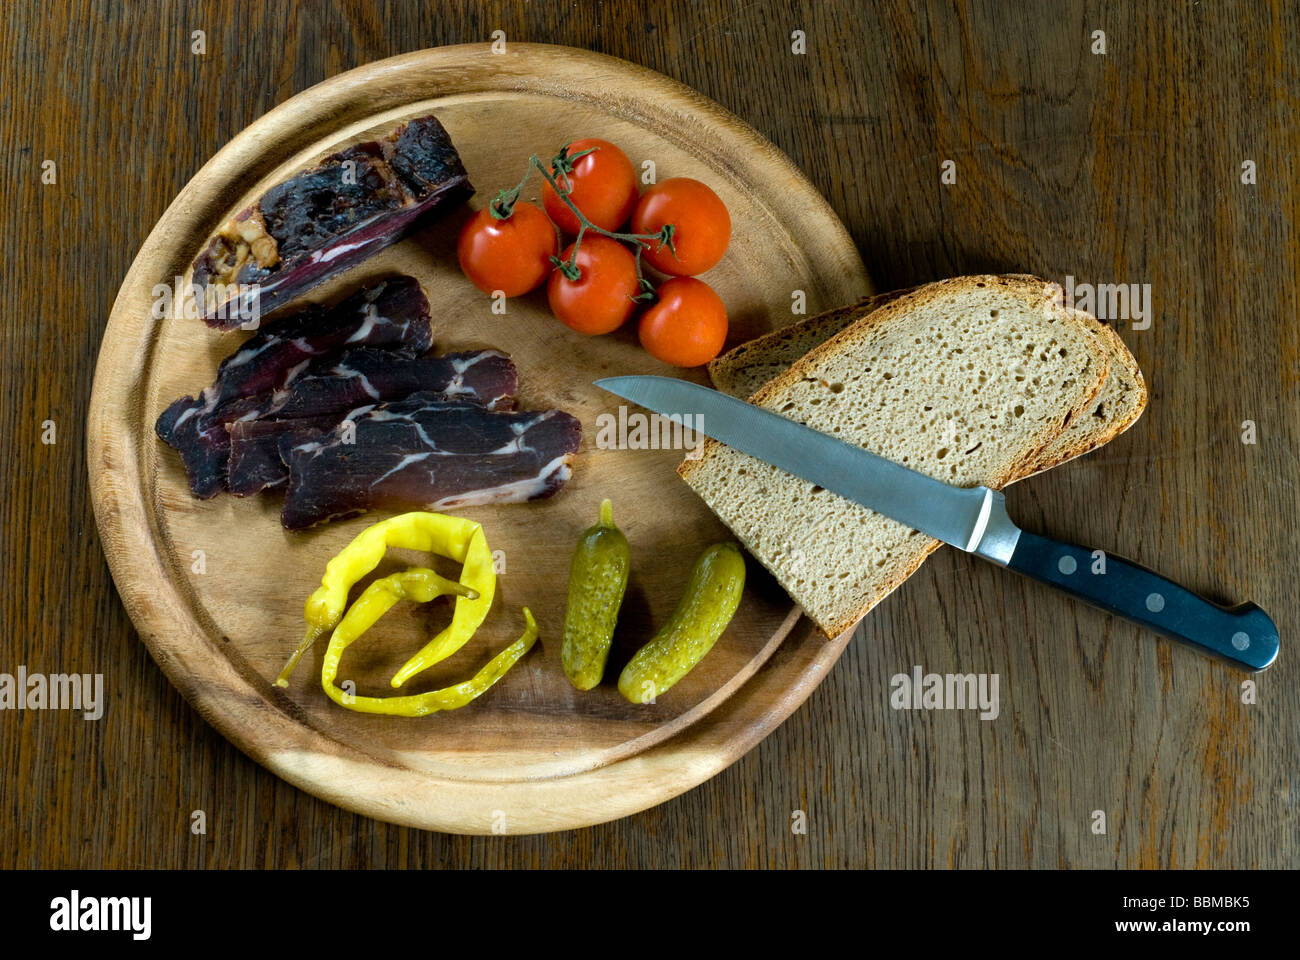 Snack with wild boar ham, tomatoes, cornicons, peppers and bread Stock Photo